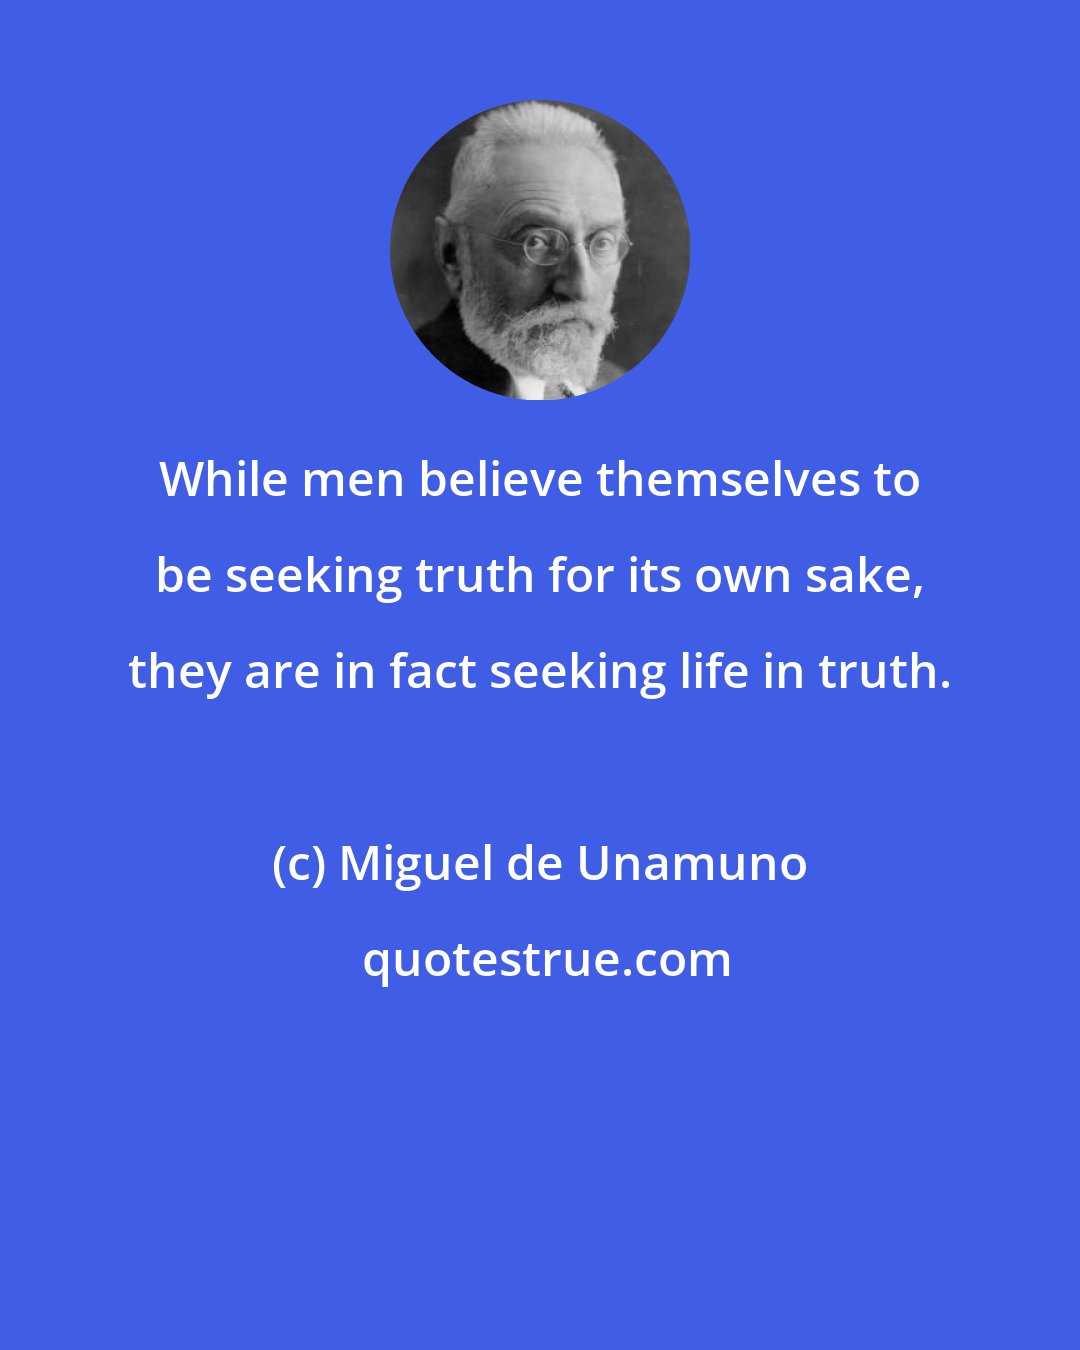 Miguel de Unamuno: While men believe themselves to be seeking truth for its own sake, they are in fact seeking life in truth.